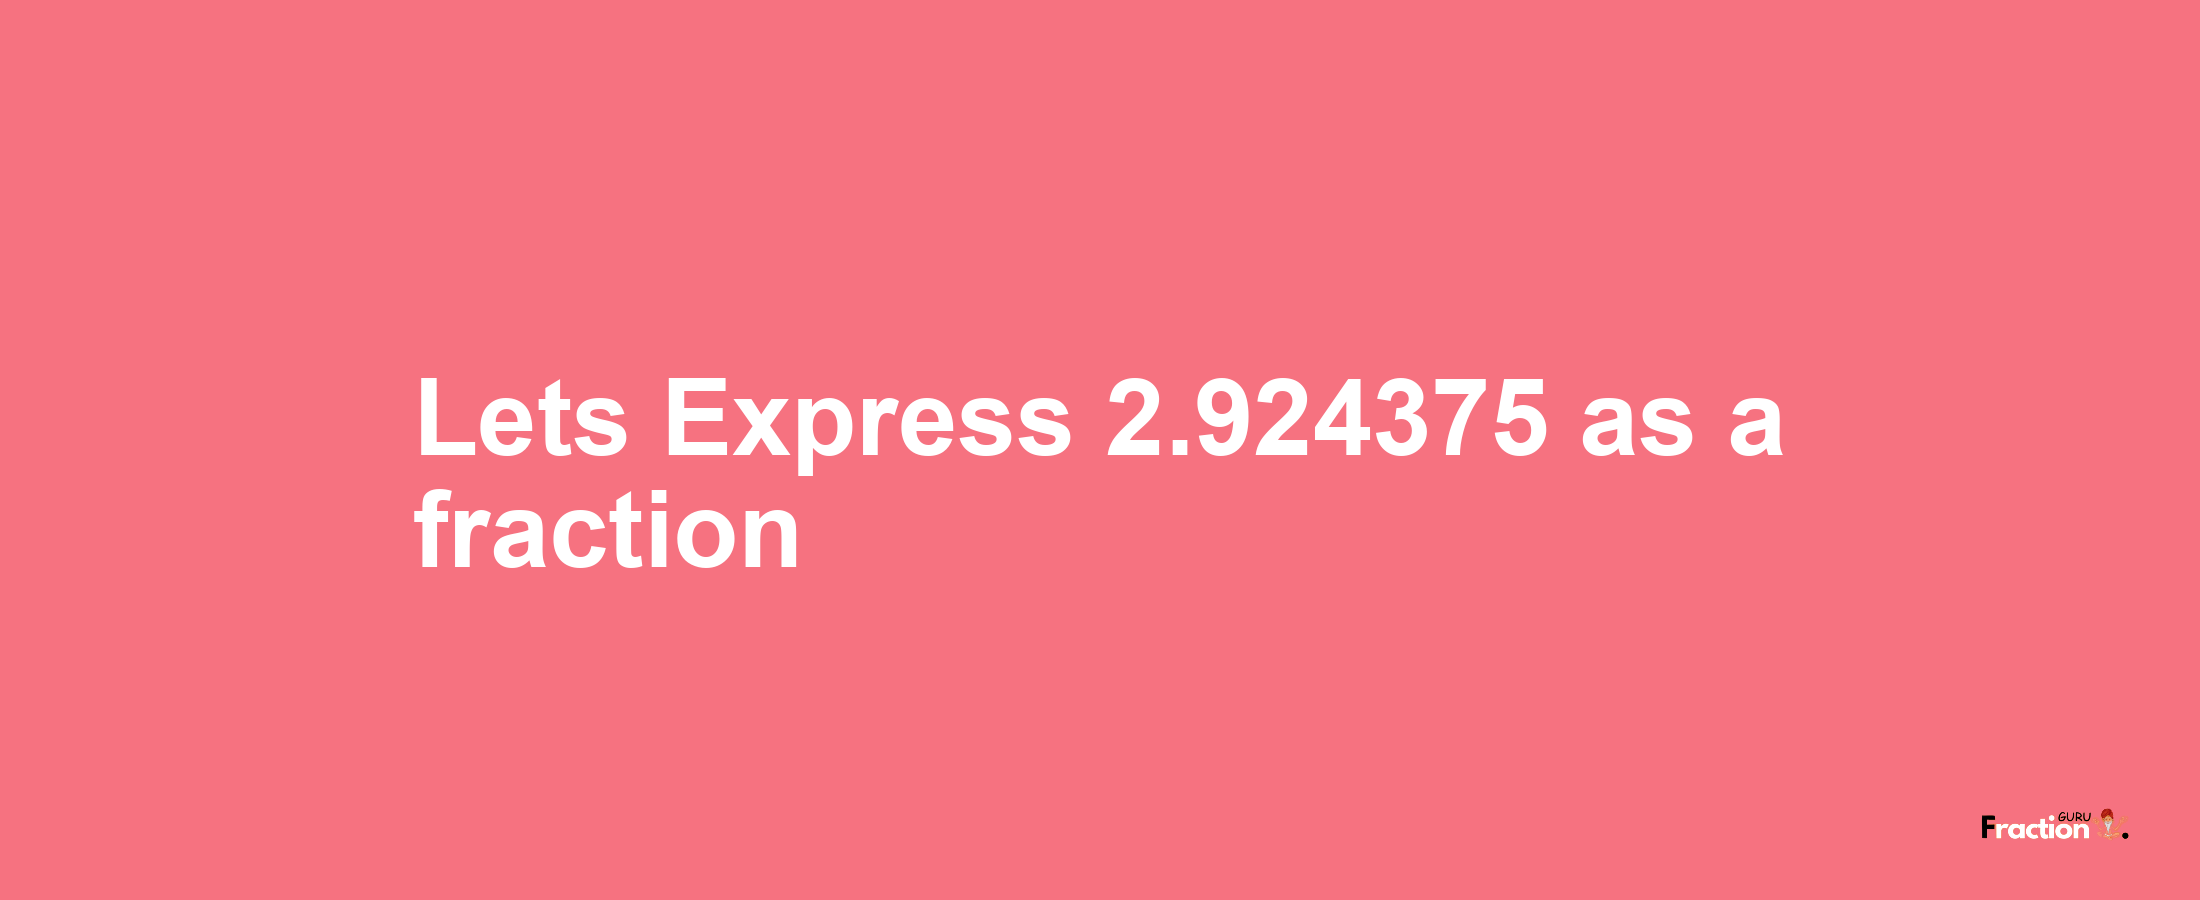 Lets Express 2.924375 as afraction